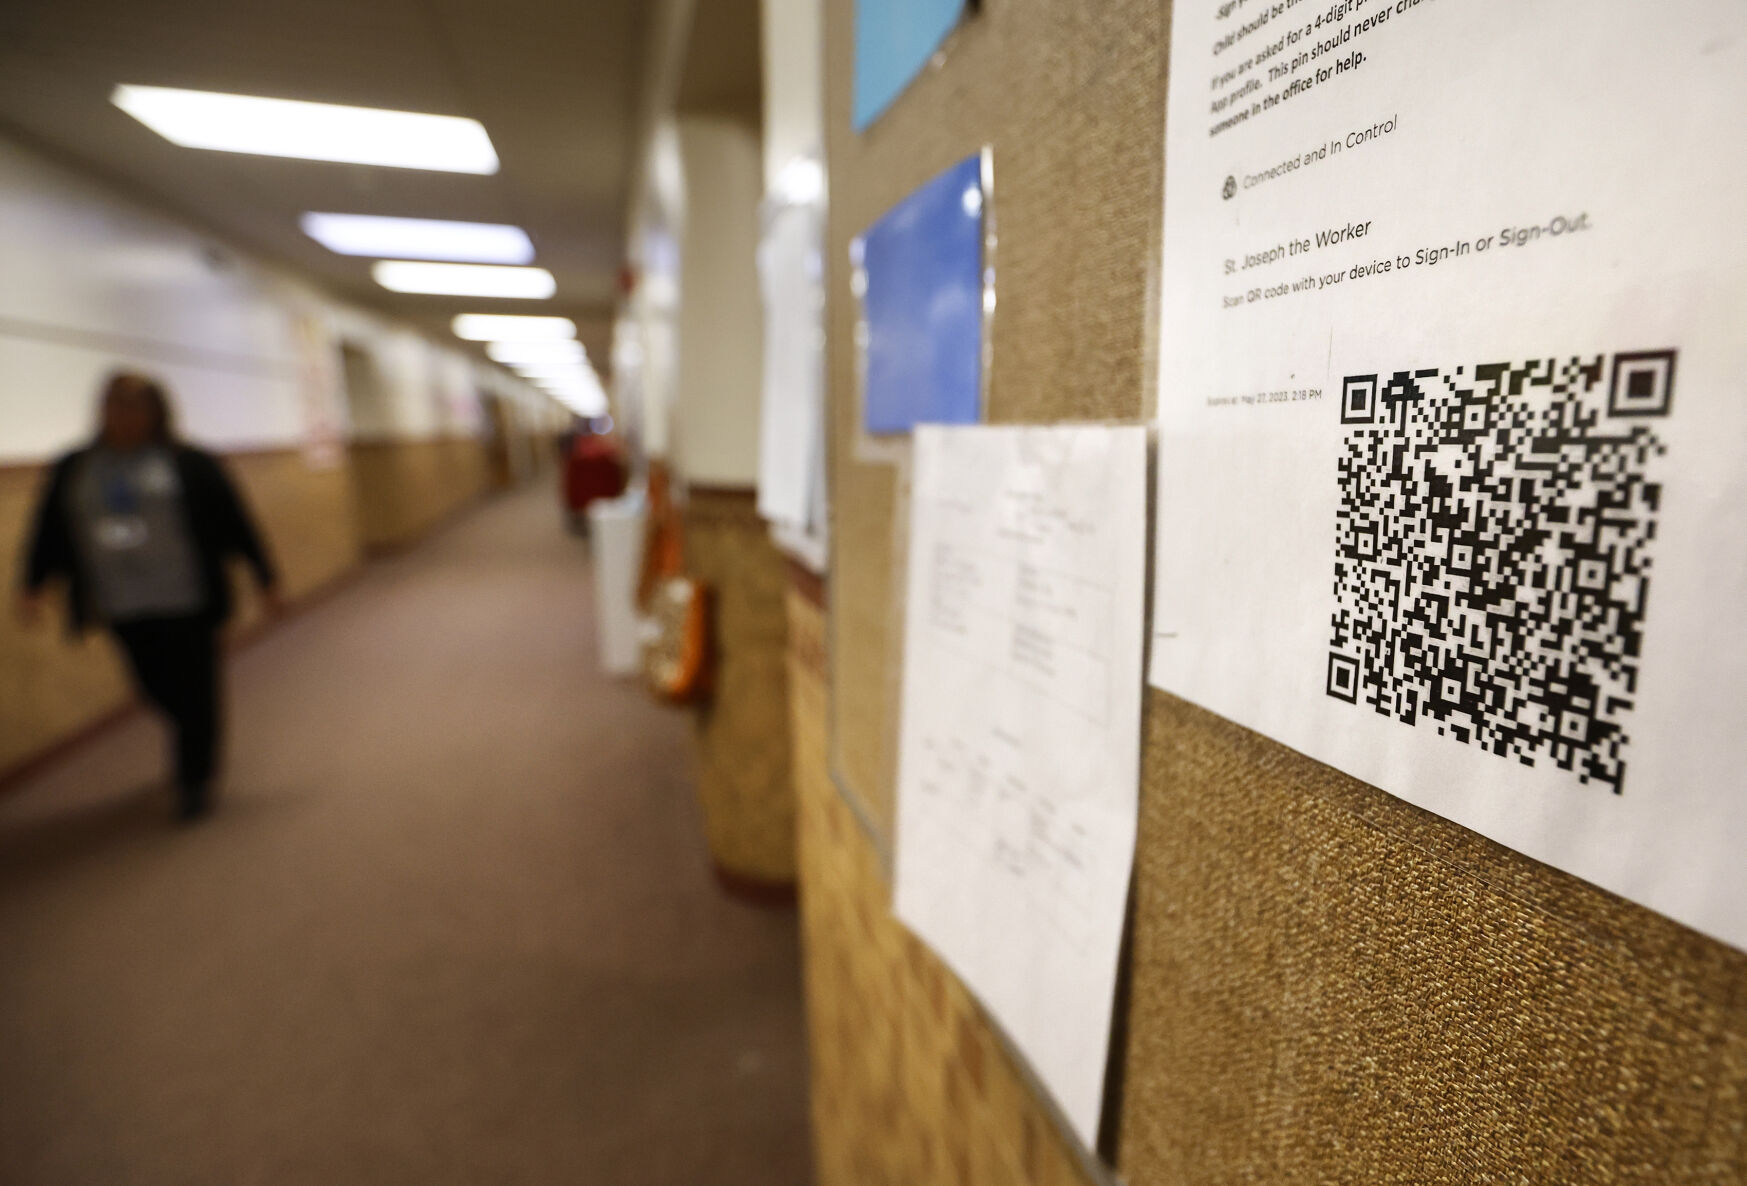 A QR code is displayed on a bulletin board.    PHOTO CREDIT: JESSICA REILLY
Telegraph Herald